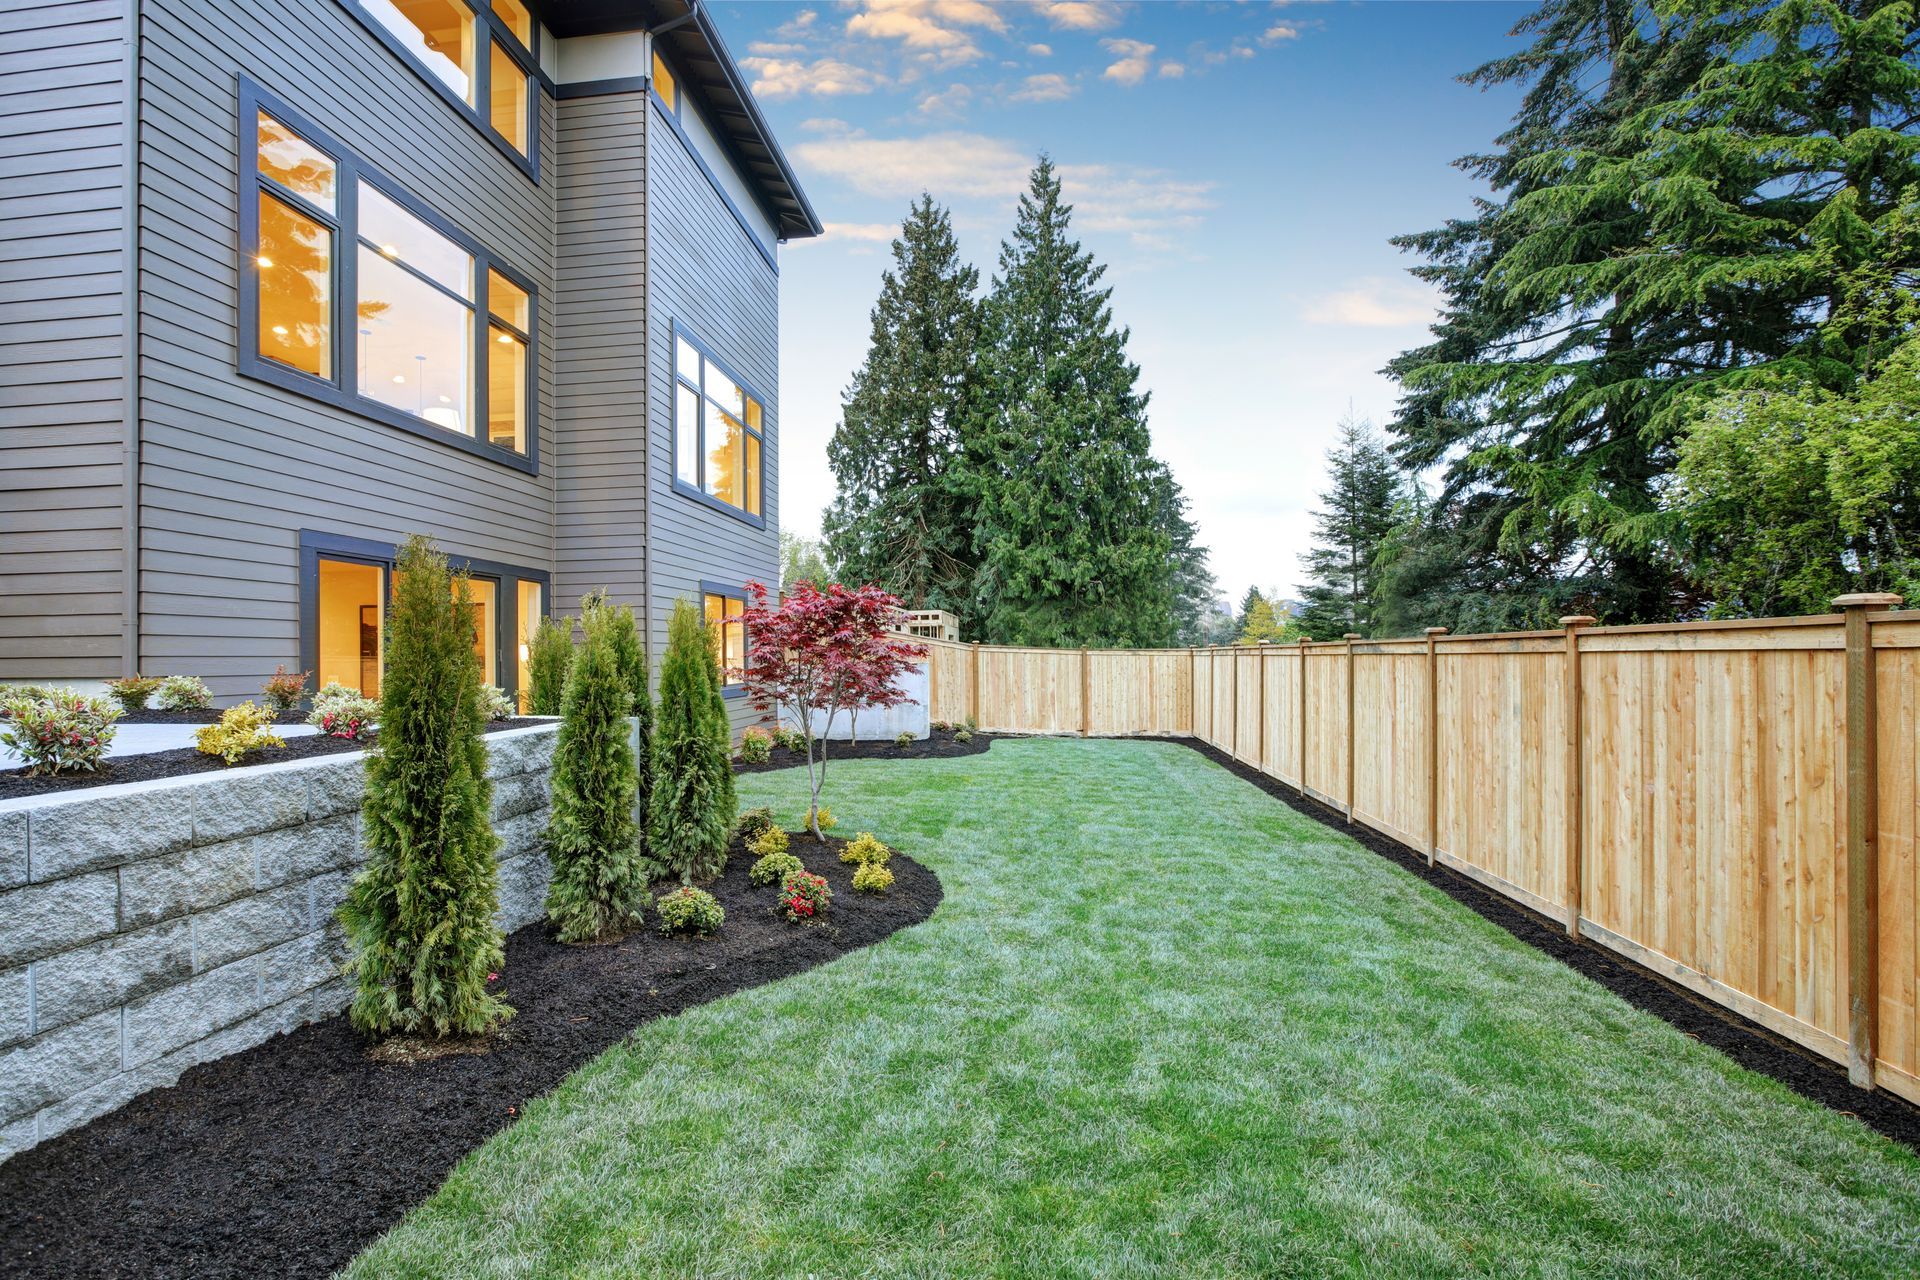 the backyard of a house with a wooden fence and a large lawn .